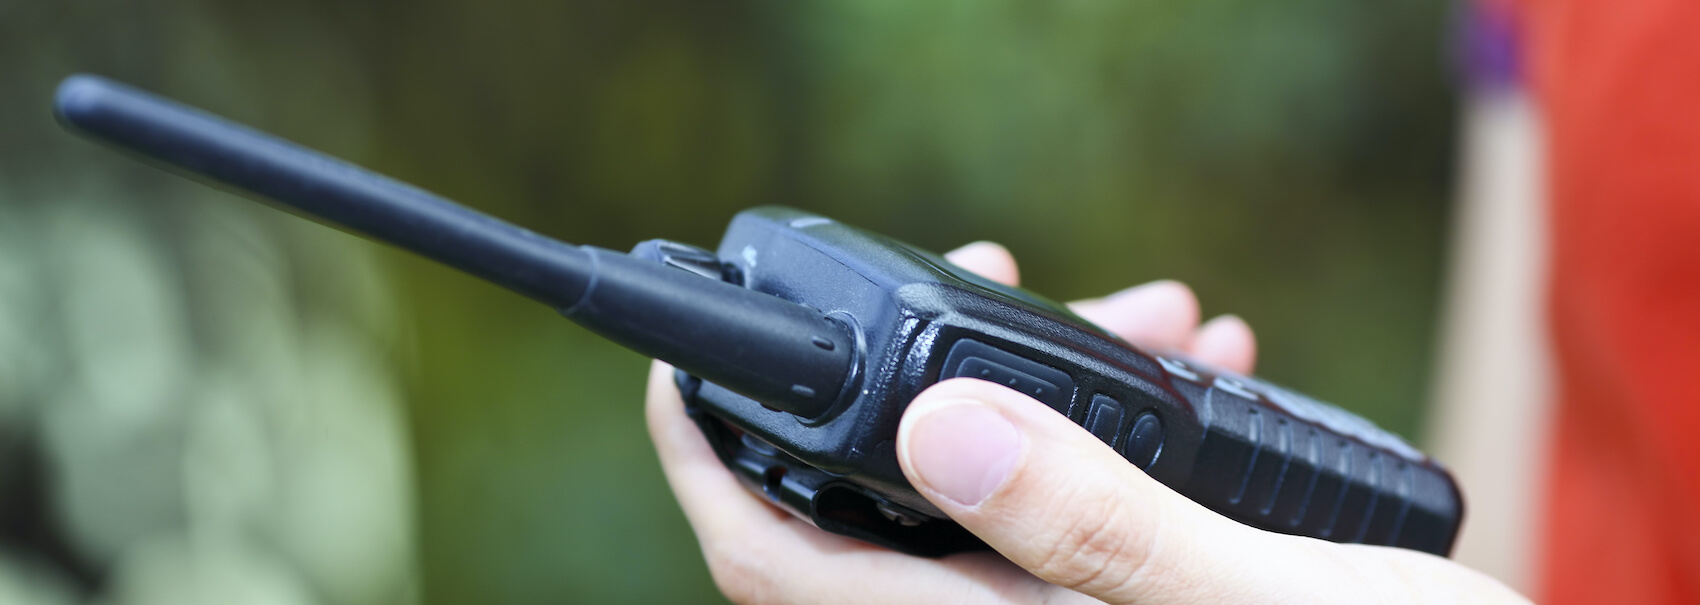 Police Two-Way Radios for Sale 